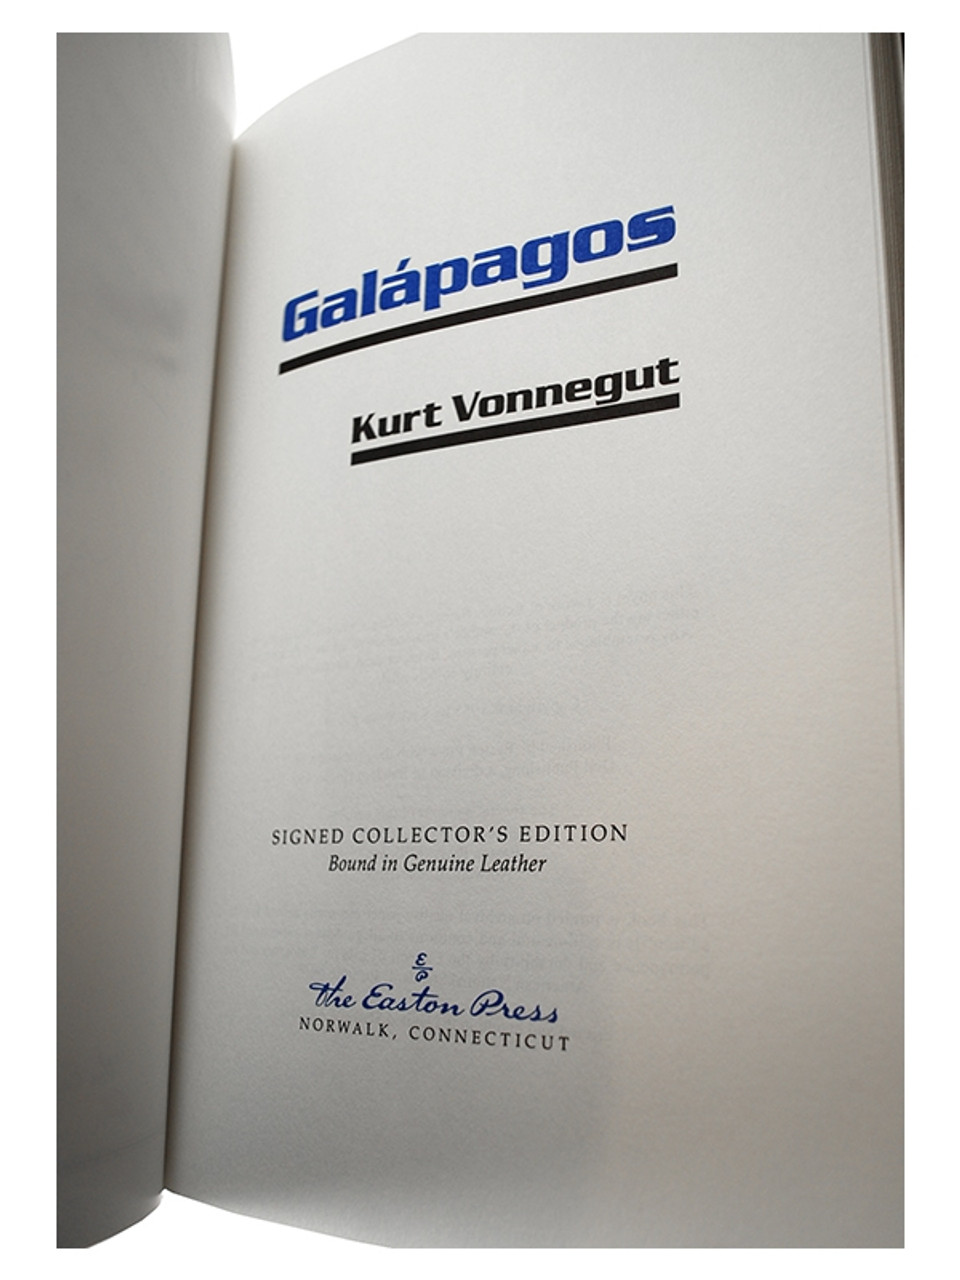 Signed by Vonnegut Galapagos Leather Bound Easton Press